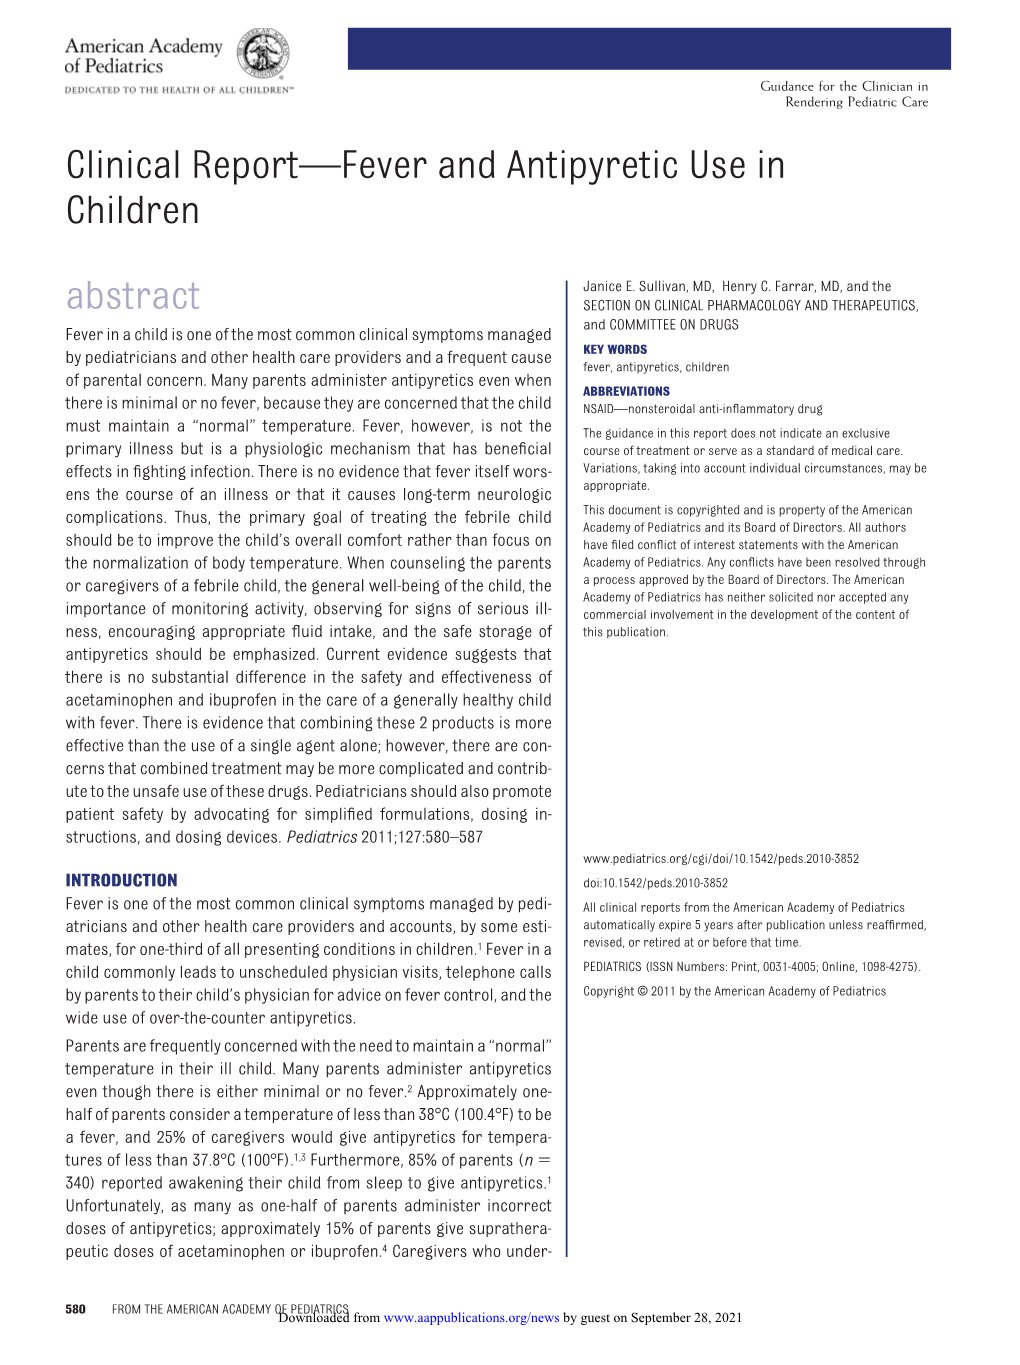 Clinical Report—Fever and Antipyretic Use in Children Abstract